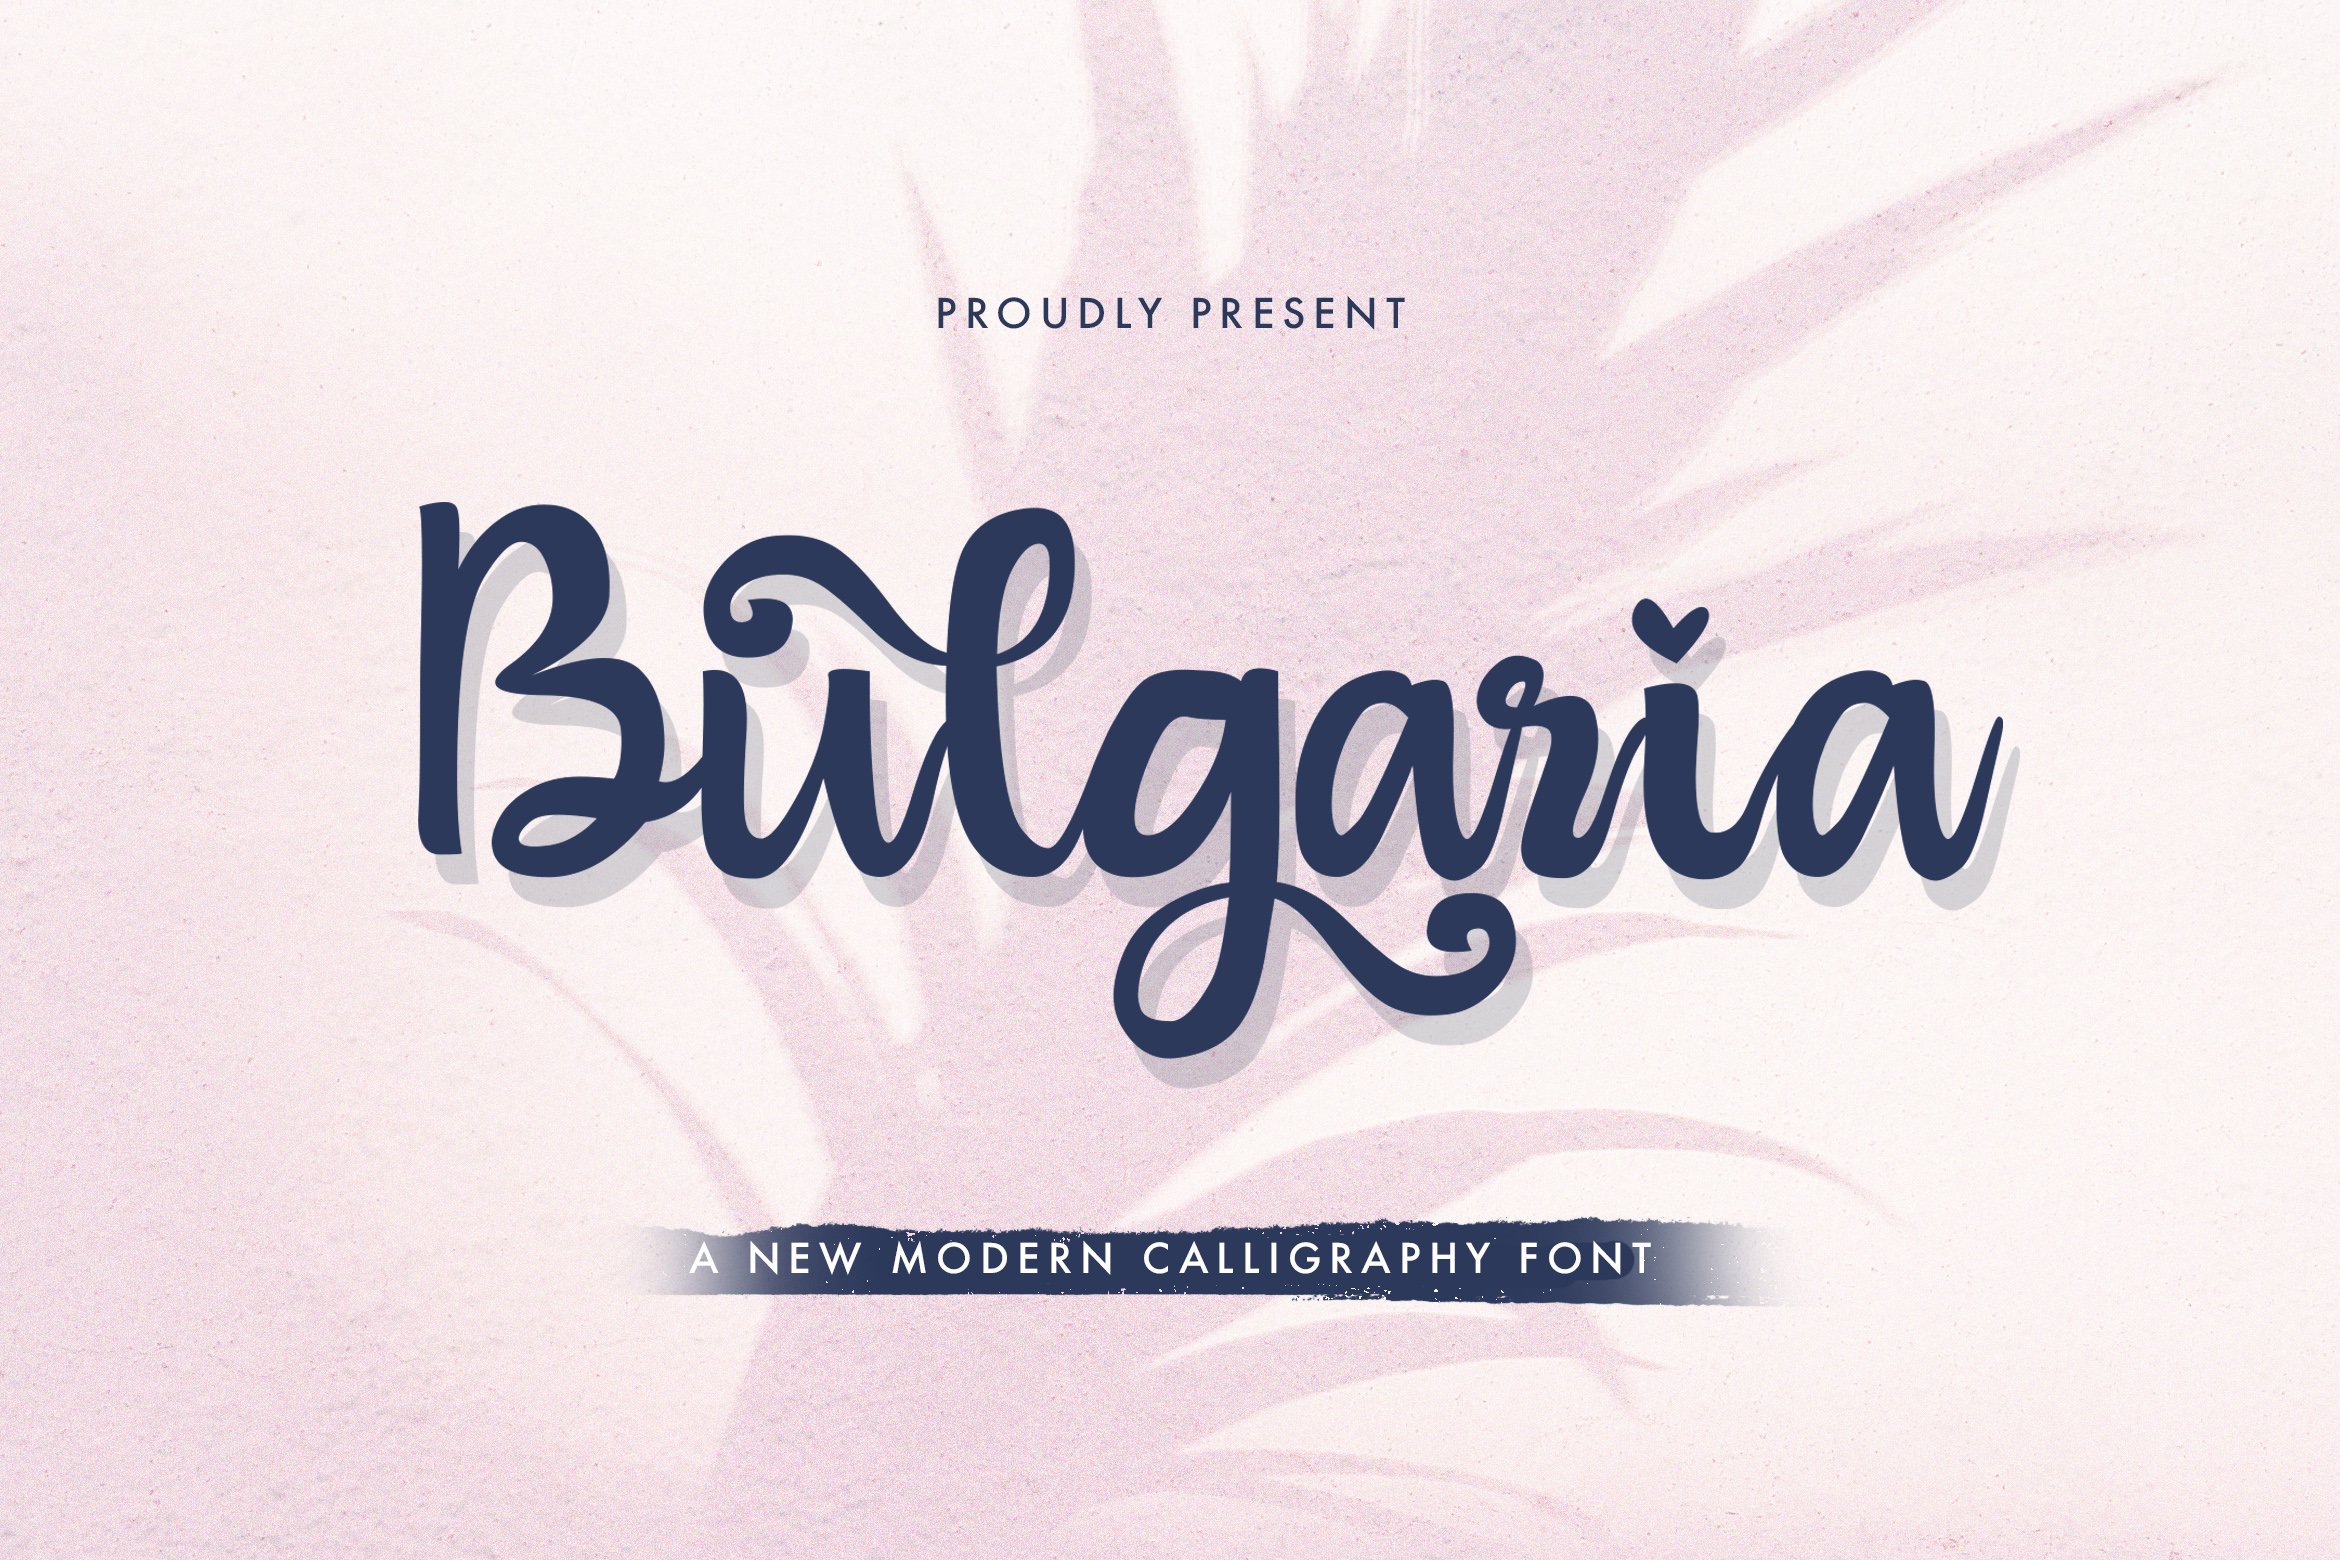 Bulgaria - Modern Calligraphy Font cover image.